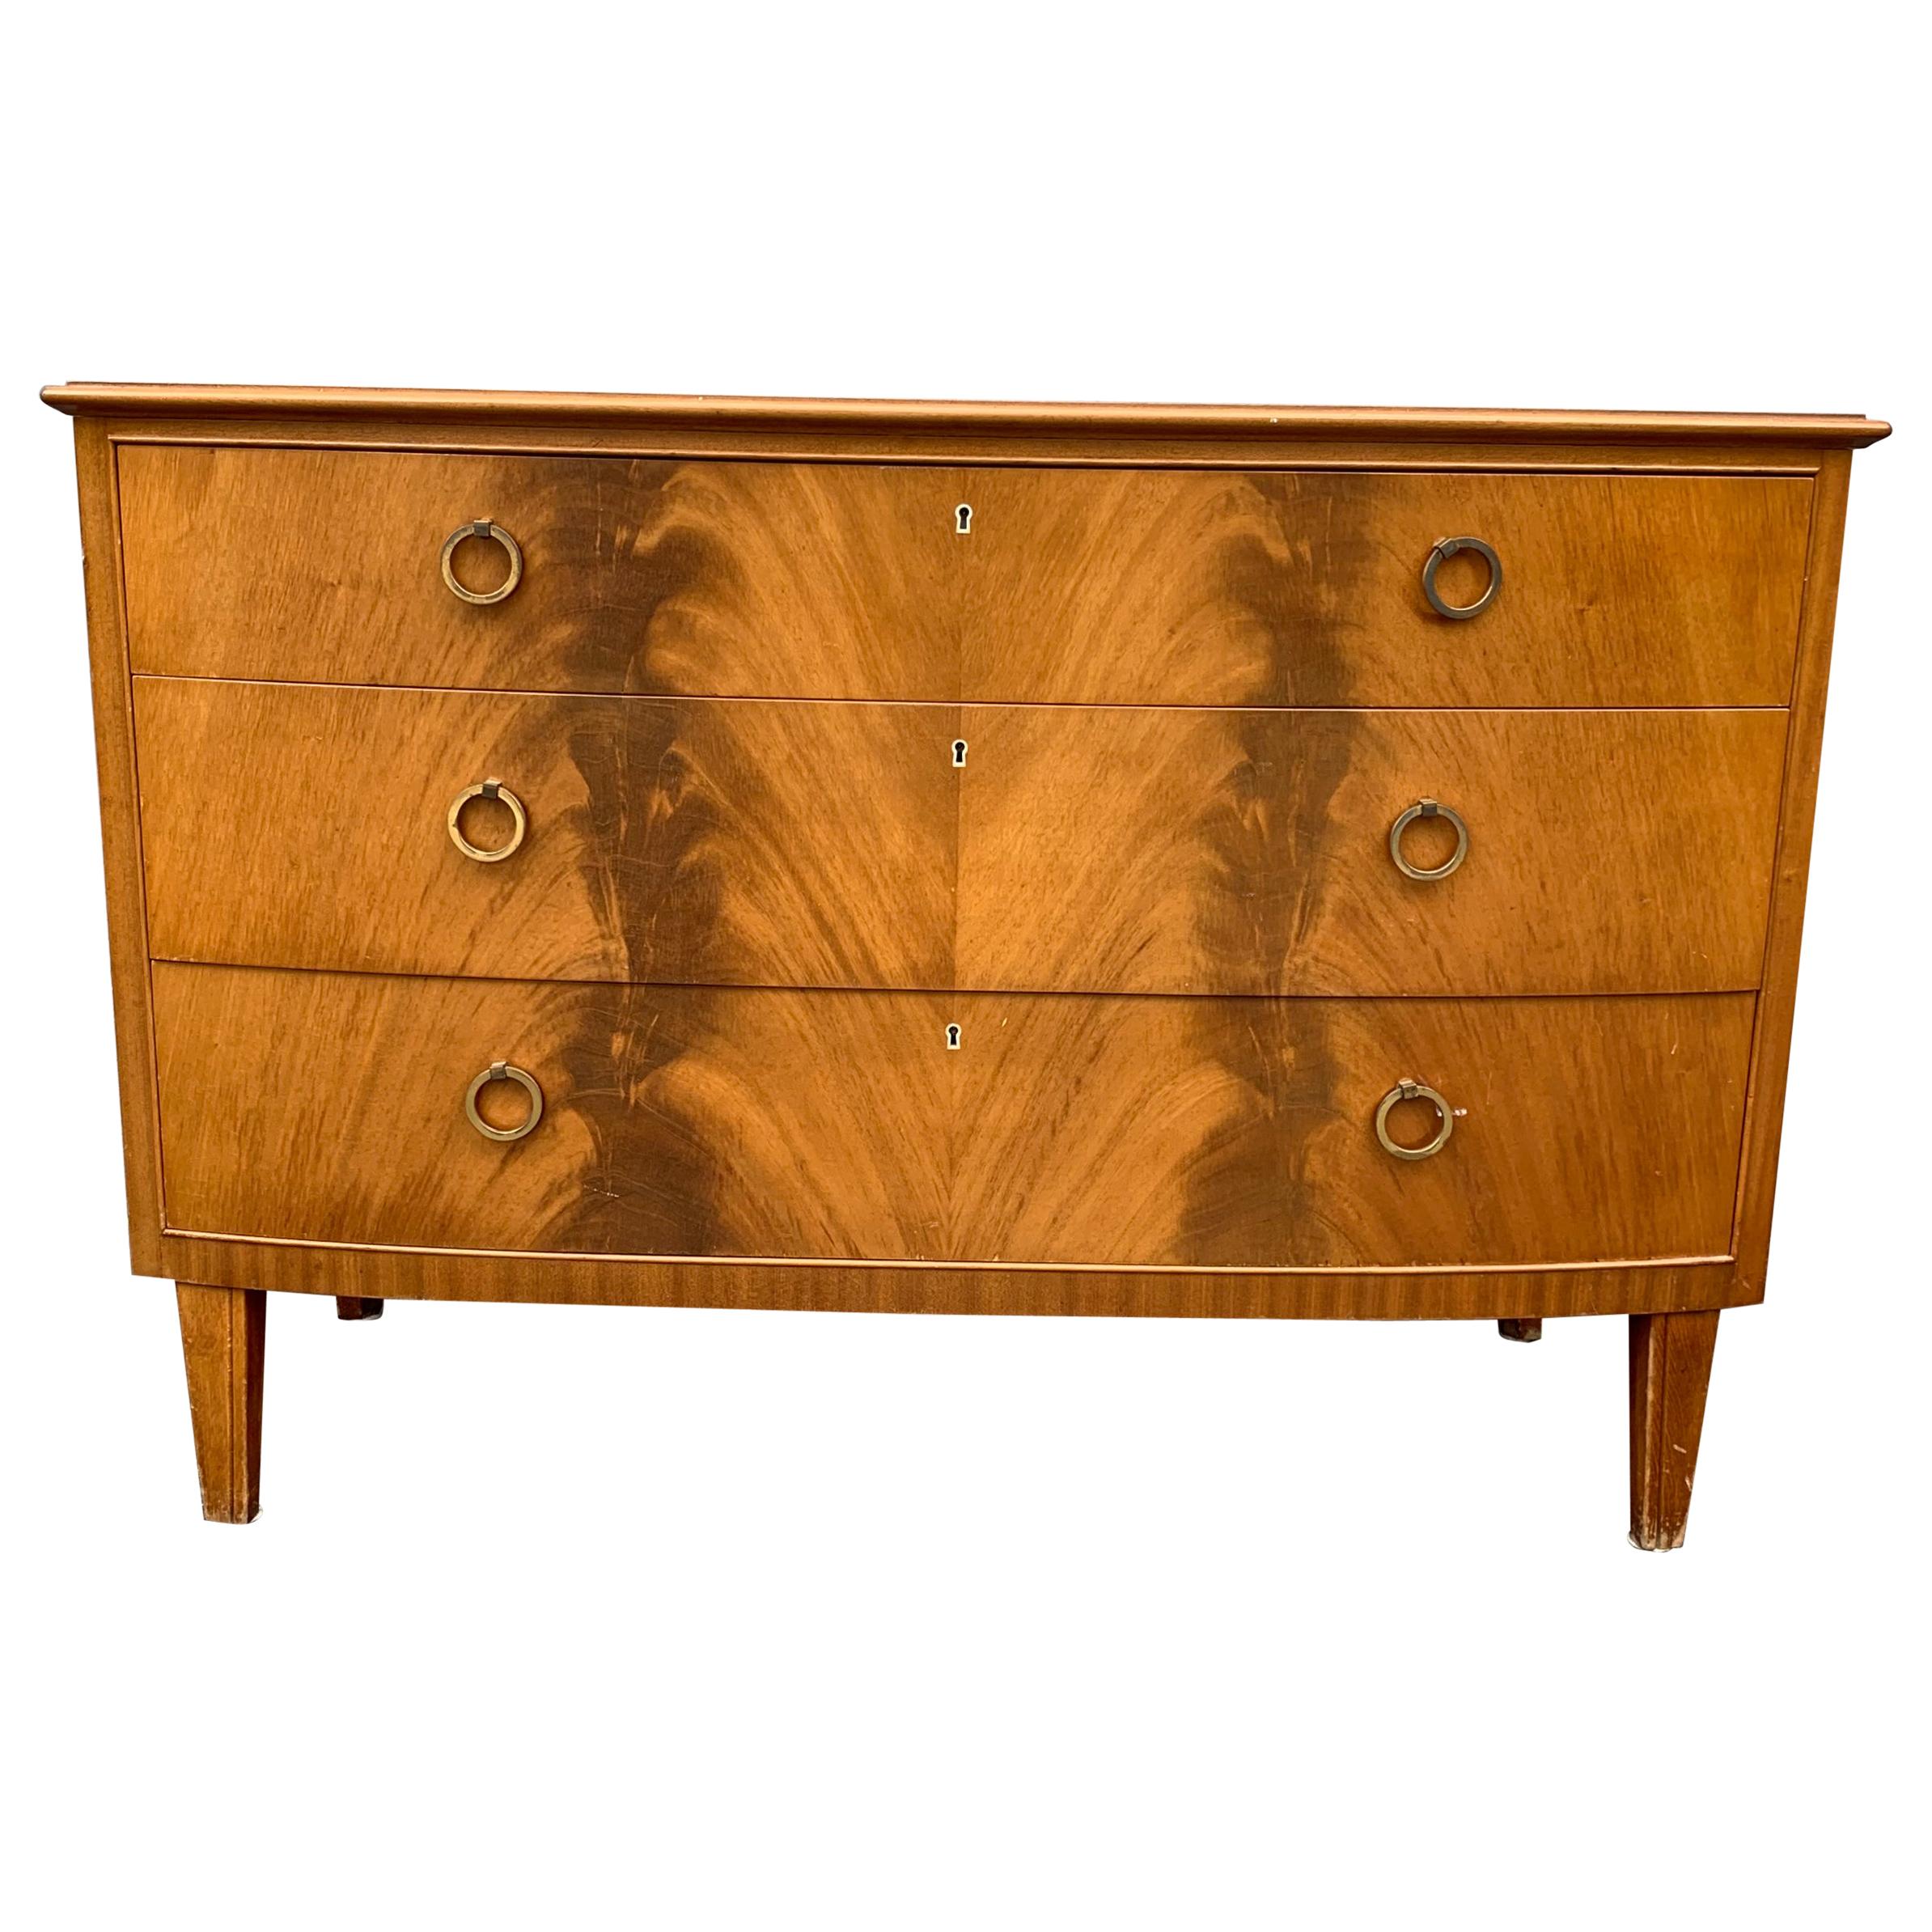 Swedish Midcentury 3-Drawer Chest with Light Mahogany Veneer and Curved Front